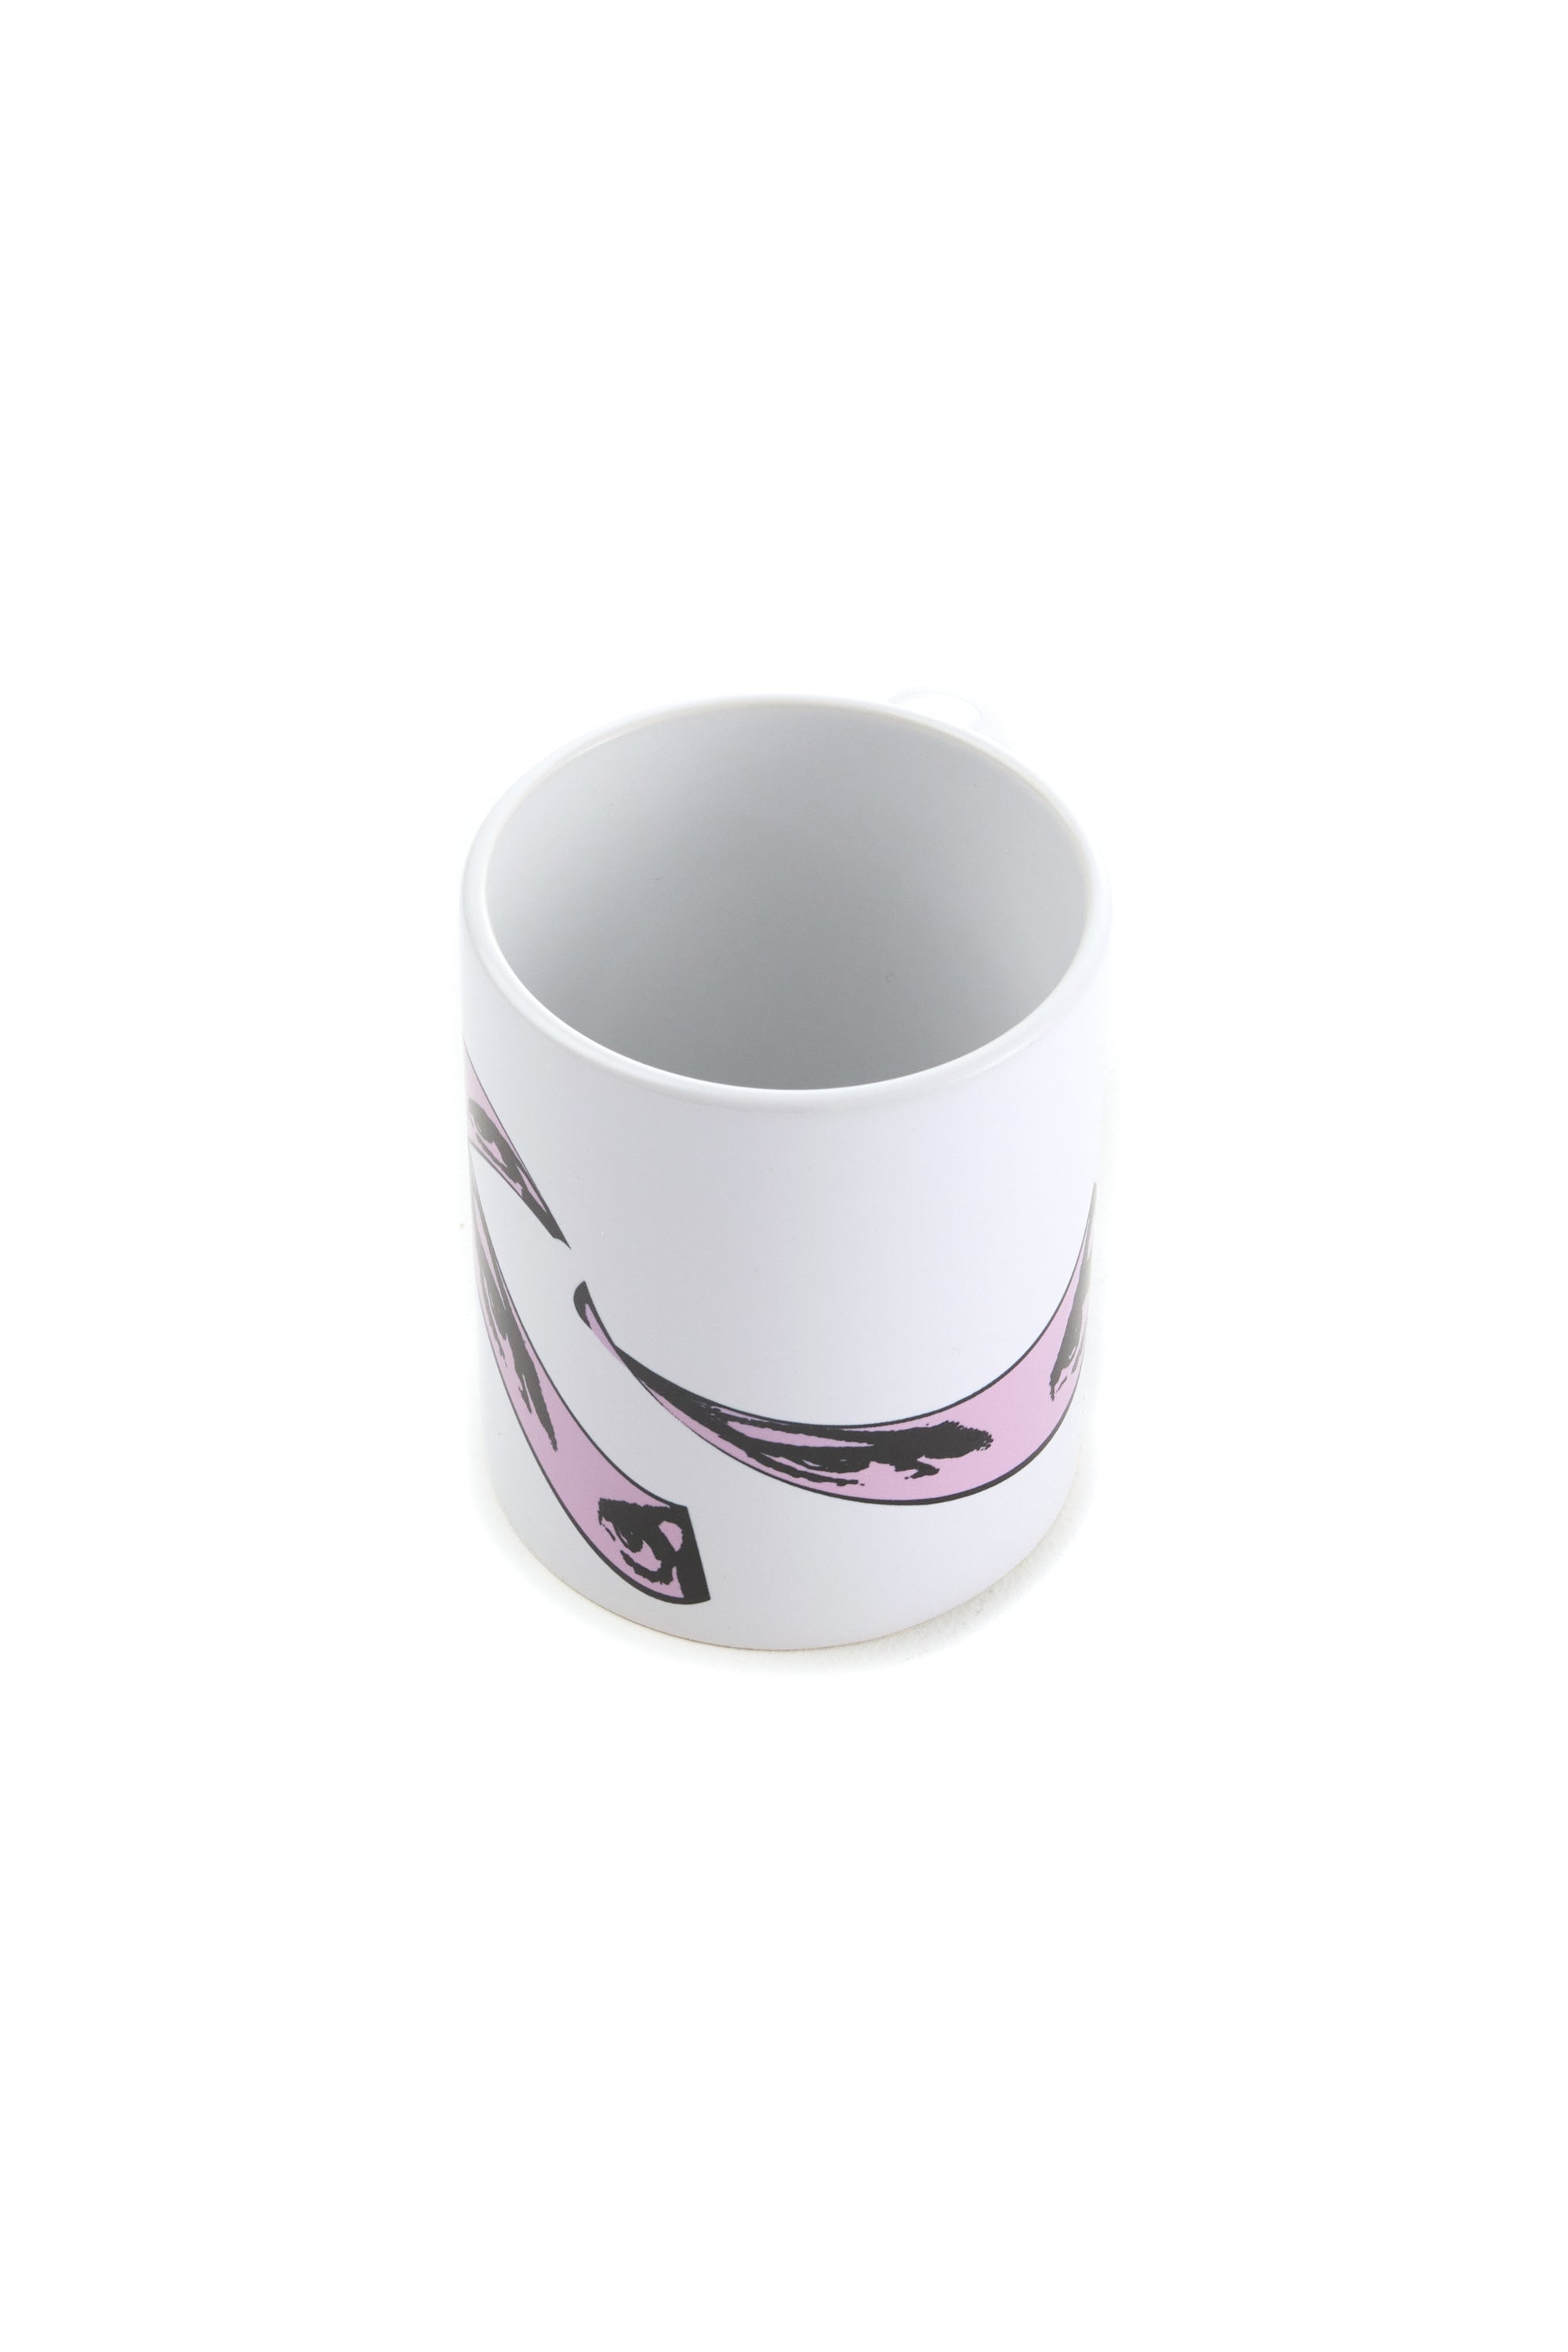 The WARPED EYES MUG  available online with global shipping, and in PAM Stores Melbourne and Sydney.